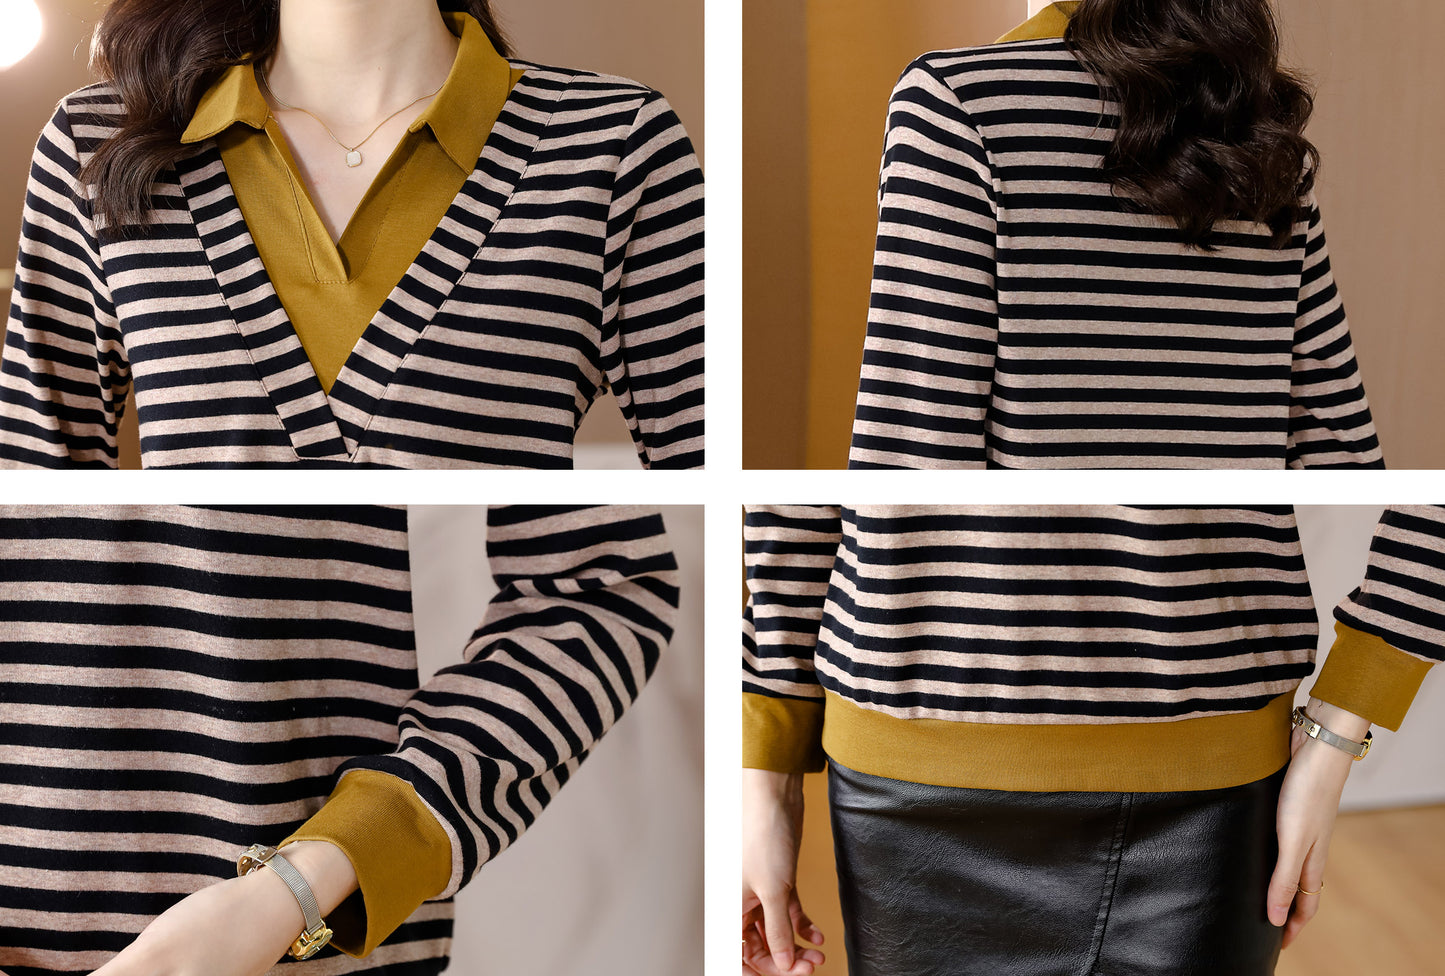 Collar Neck Long Sleeves Patchwork Stripe Blouse